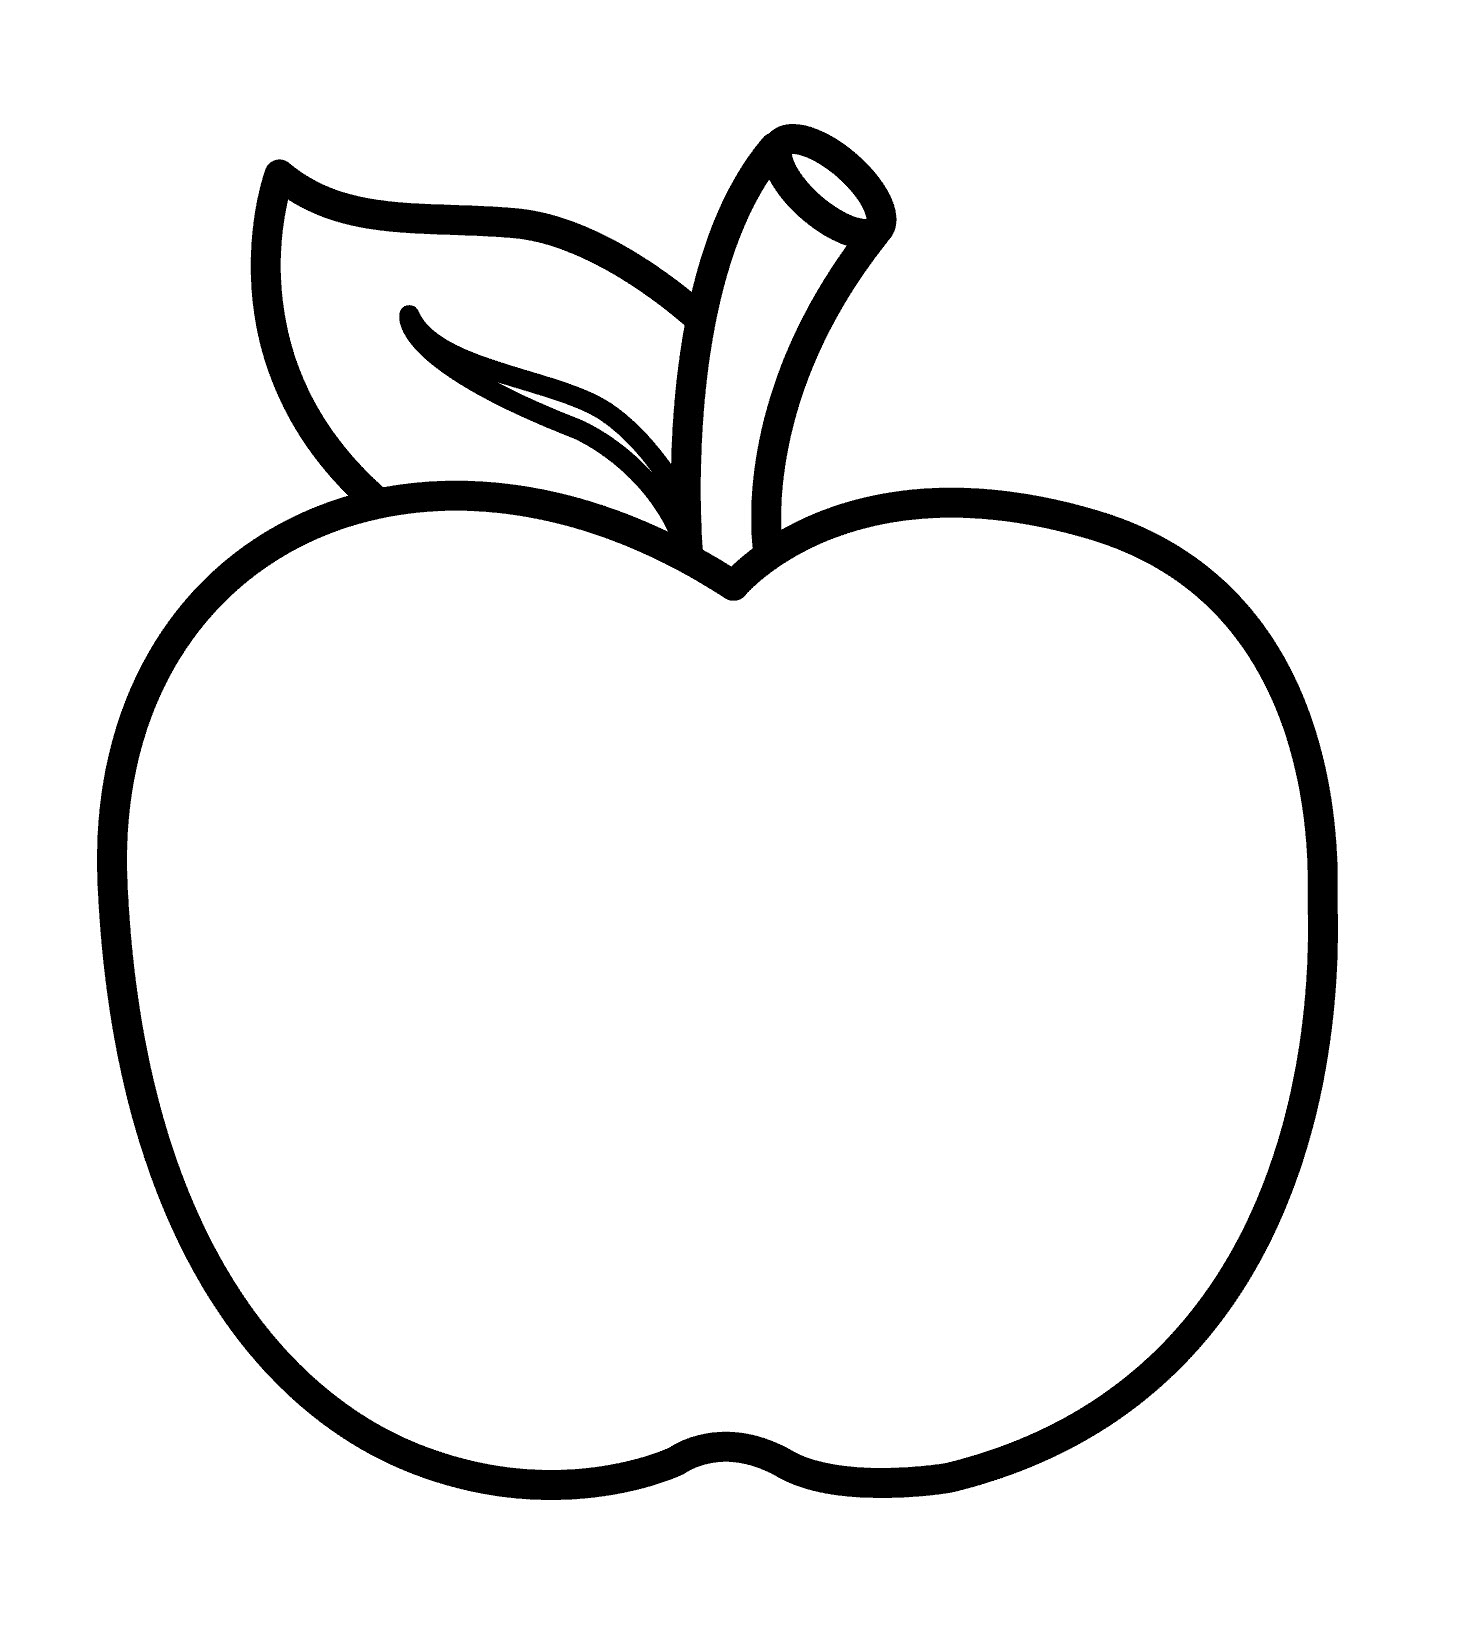 Guide to draw a lovely apple  YouTube